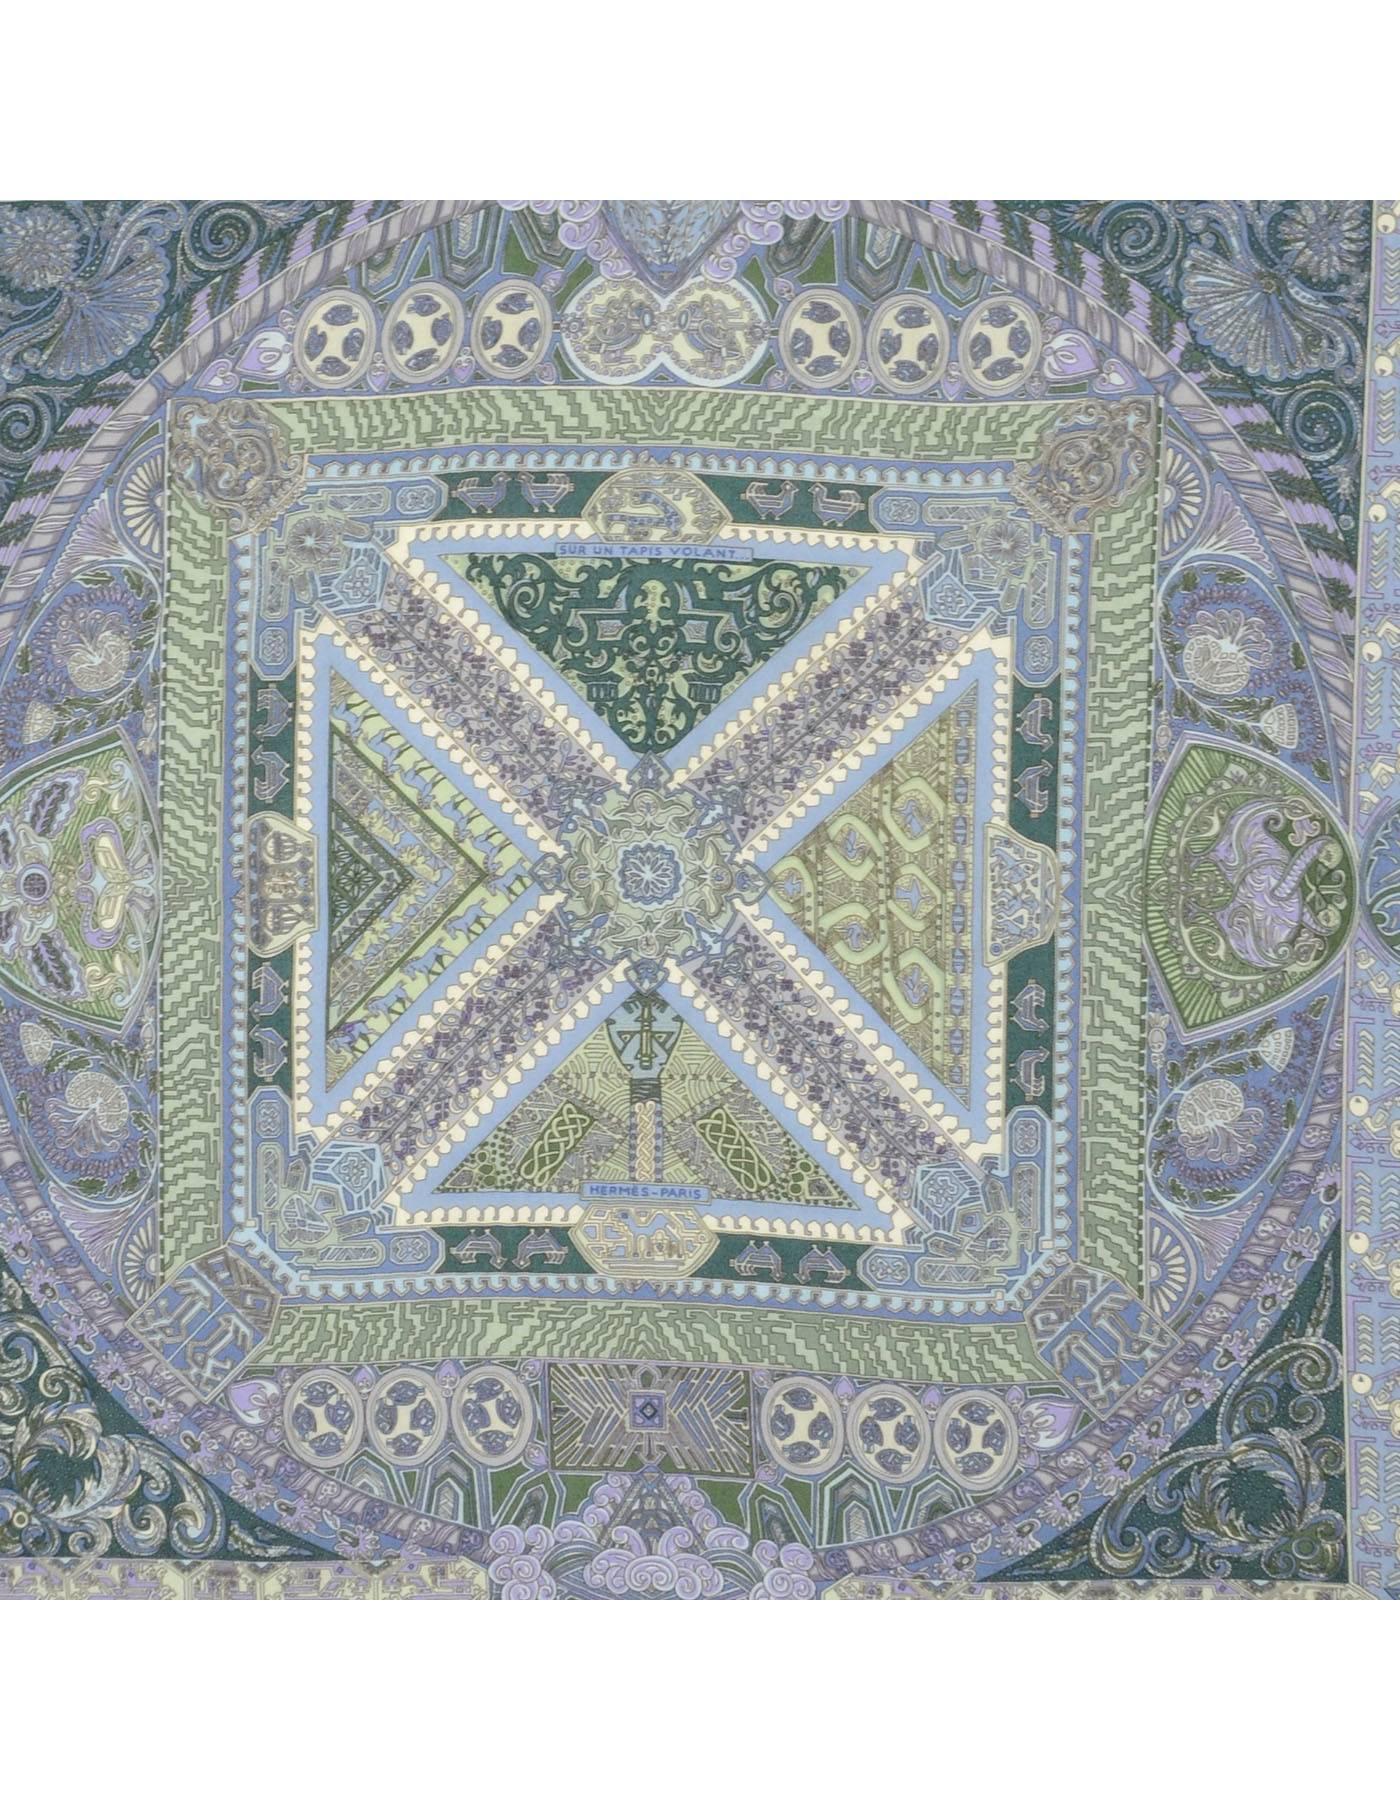 Hermes Blue Sur Un Tapis Volant Cashmere & Silk Scarf

Features intricate rug printed throughout
Made In: France
Color: Blue, purple, and green
Composition:  65% cashmere, 35% silk
Retail Price: $670 + tax
Overall Condition: Excellent